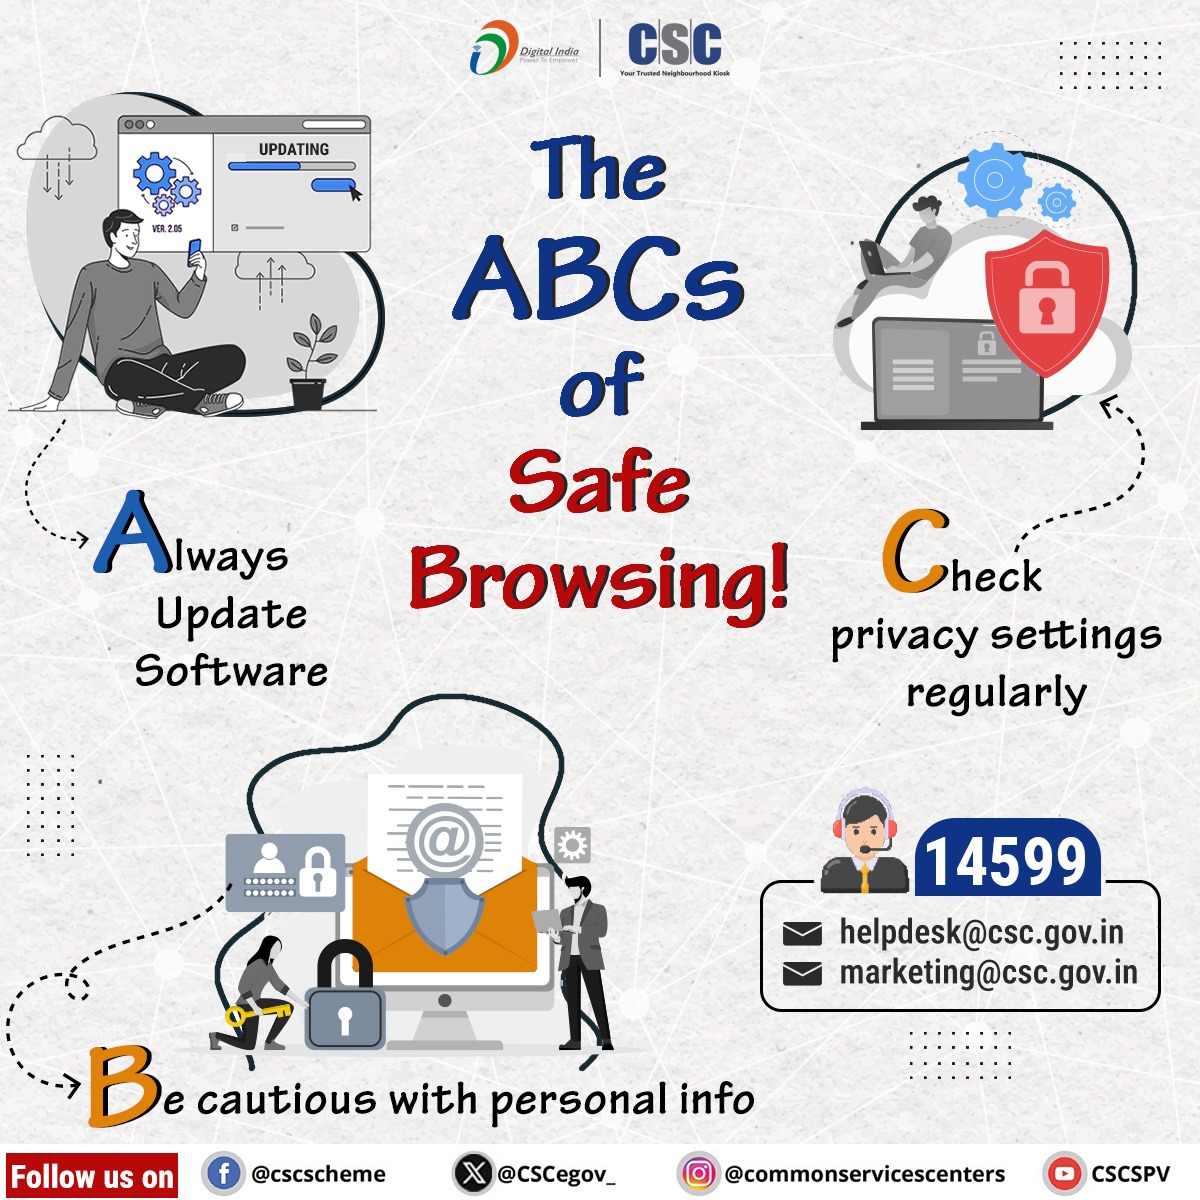 VLEs #beware of fraudsters... Please follow these ABCs of Safe Browsing... Always Update Software, Be cautious with personal info & Check privacy settings regularly. For any queries, please call 14599 or write to helpdesk@csc.gov.in or marketing@csc.gov.in #CSC #CyberSecurity